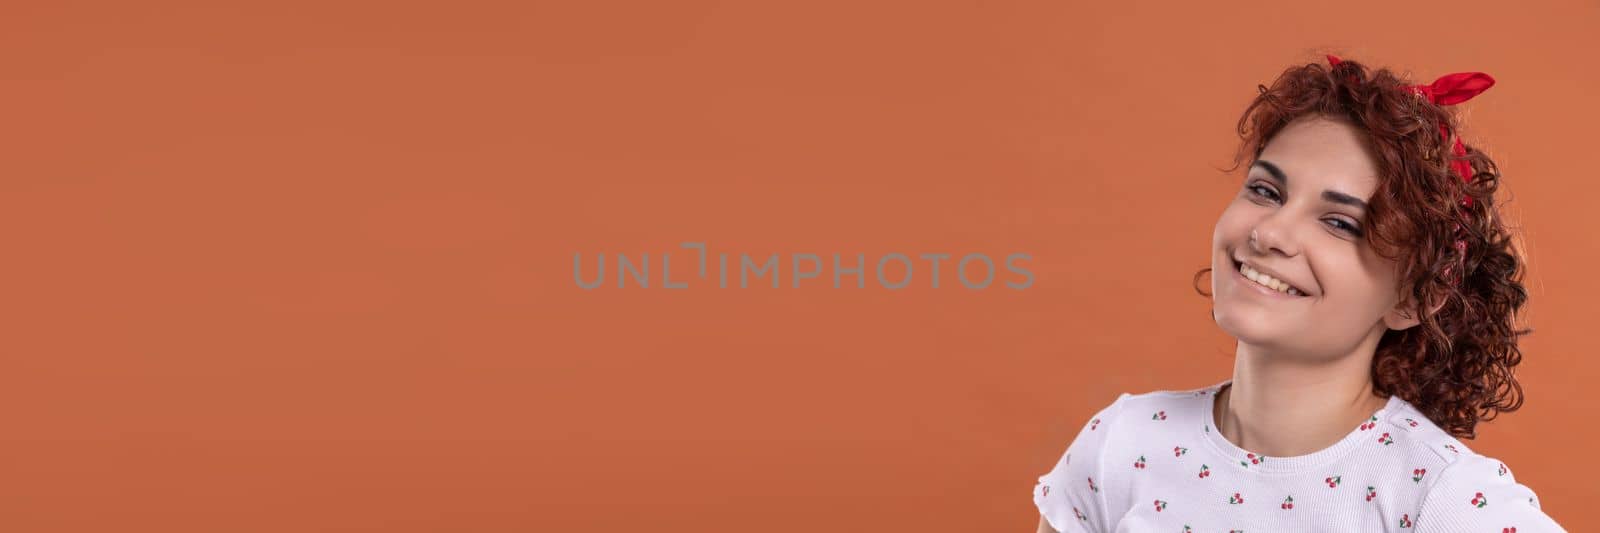 Panoramic frame of young girl. Young girl with a smile on her face. Uniform background in brick-red color. by fotodrobik